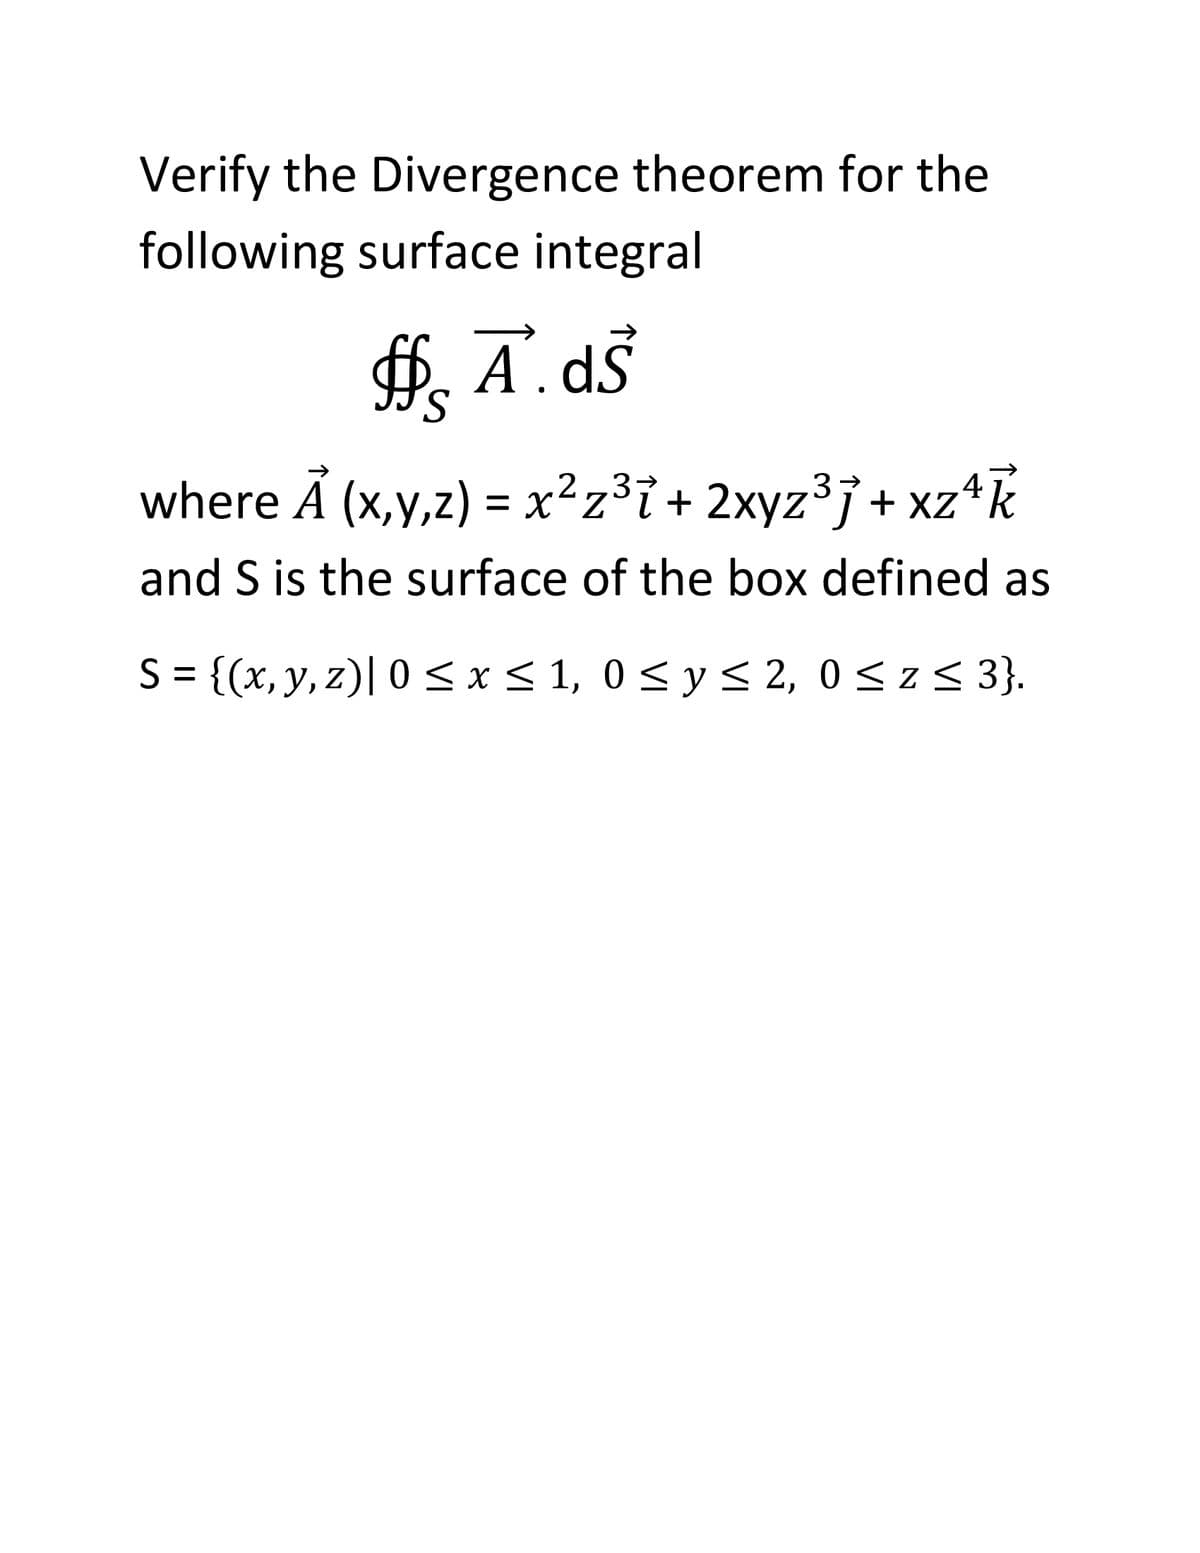 Verify the Divergence theorem for the
following surface integral
S.
where A (x,y,z) = x²z³i + 2xyz37 + xz4k
2,3
and S is the surface of the box defined as
S = {(x,y, z)| 0 <x< 1, 0 < y < 2, 0 < z< 3}.
